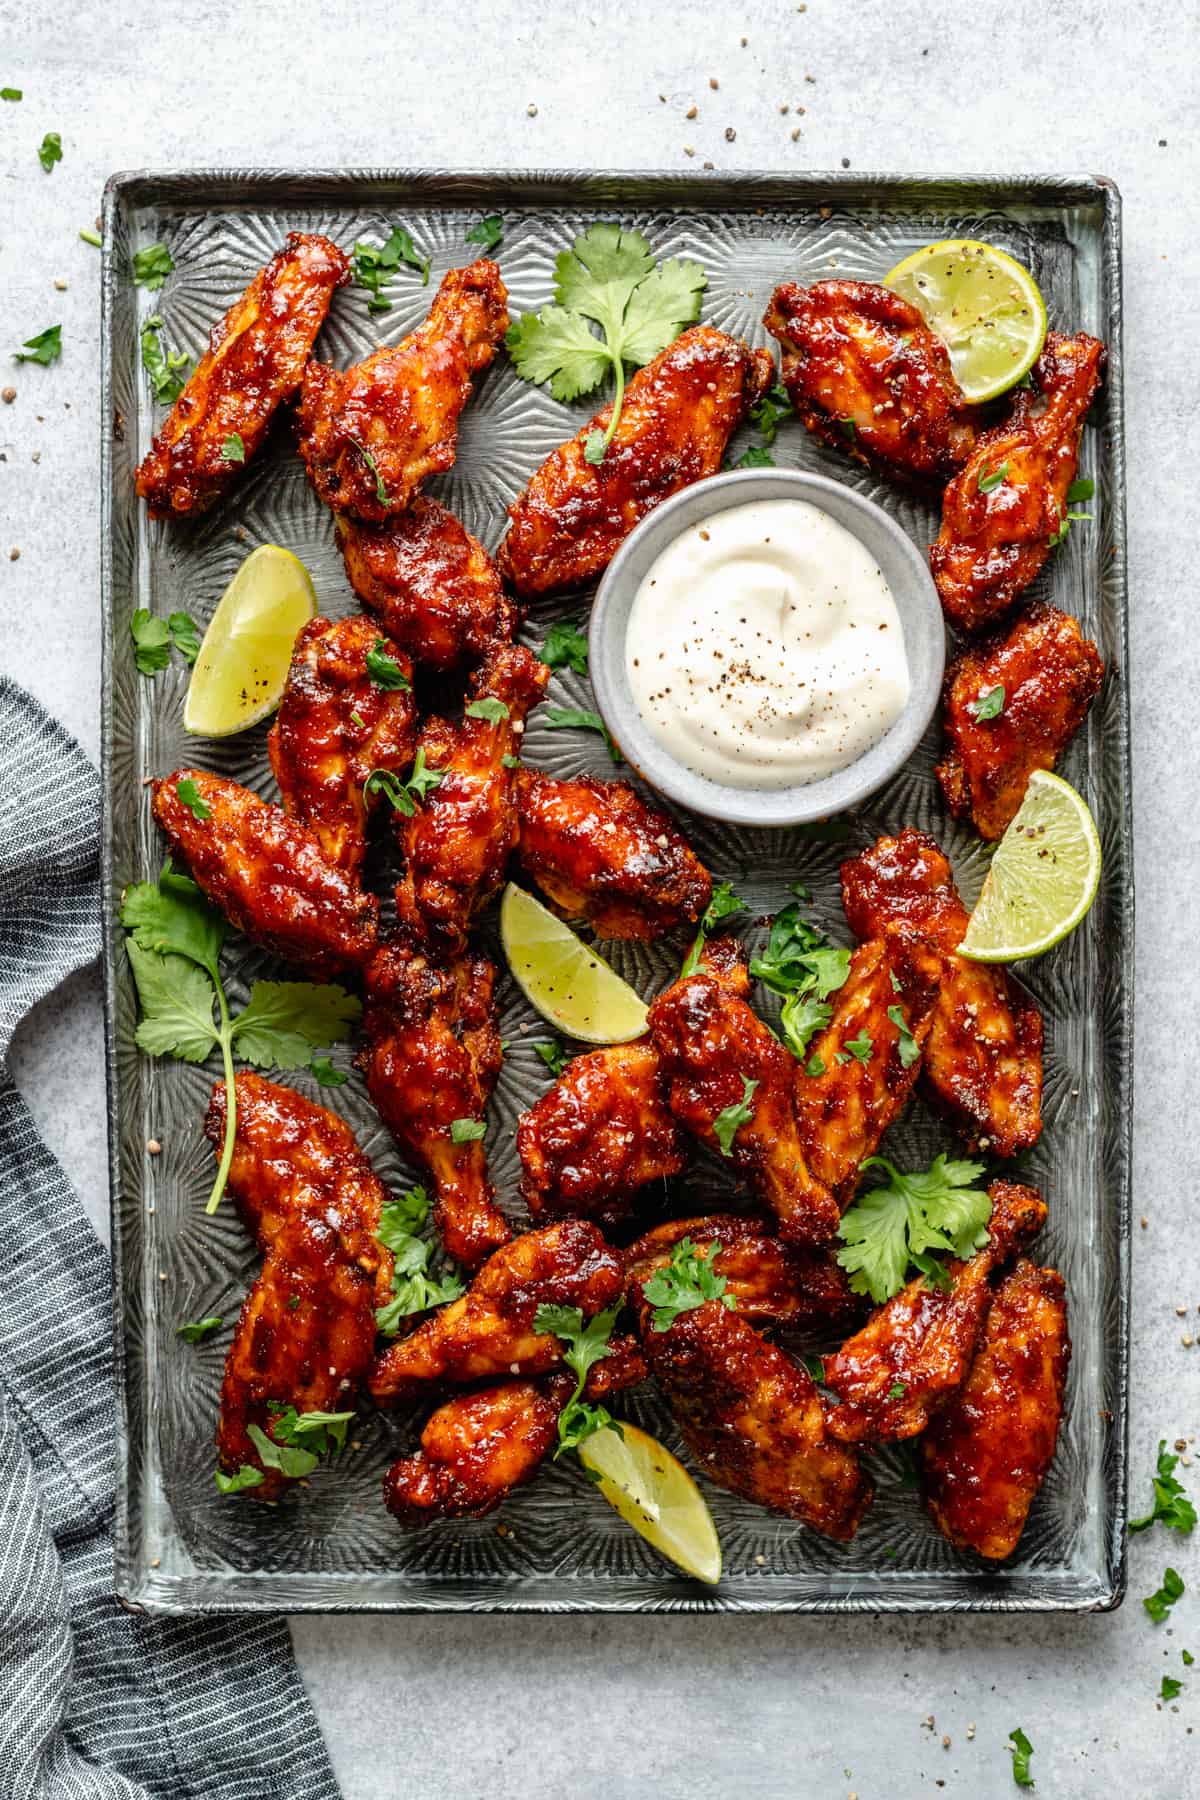 An array of sticky spicy baked chicken wings on a metal tray with lime wedges and coriander leaves served with a small bowl of dip.